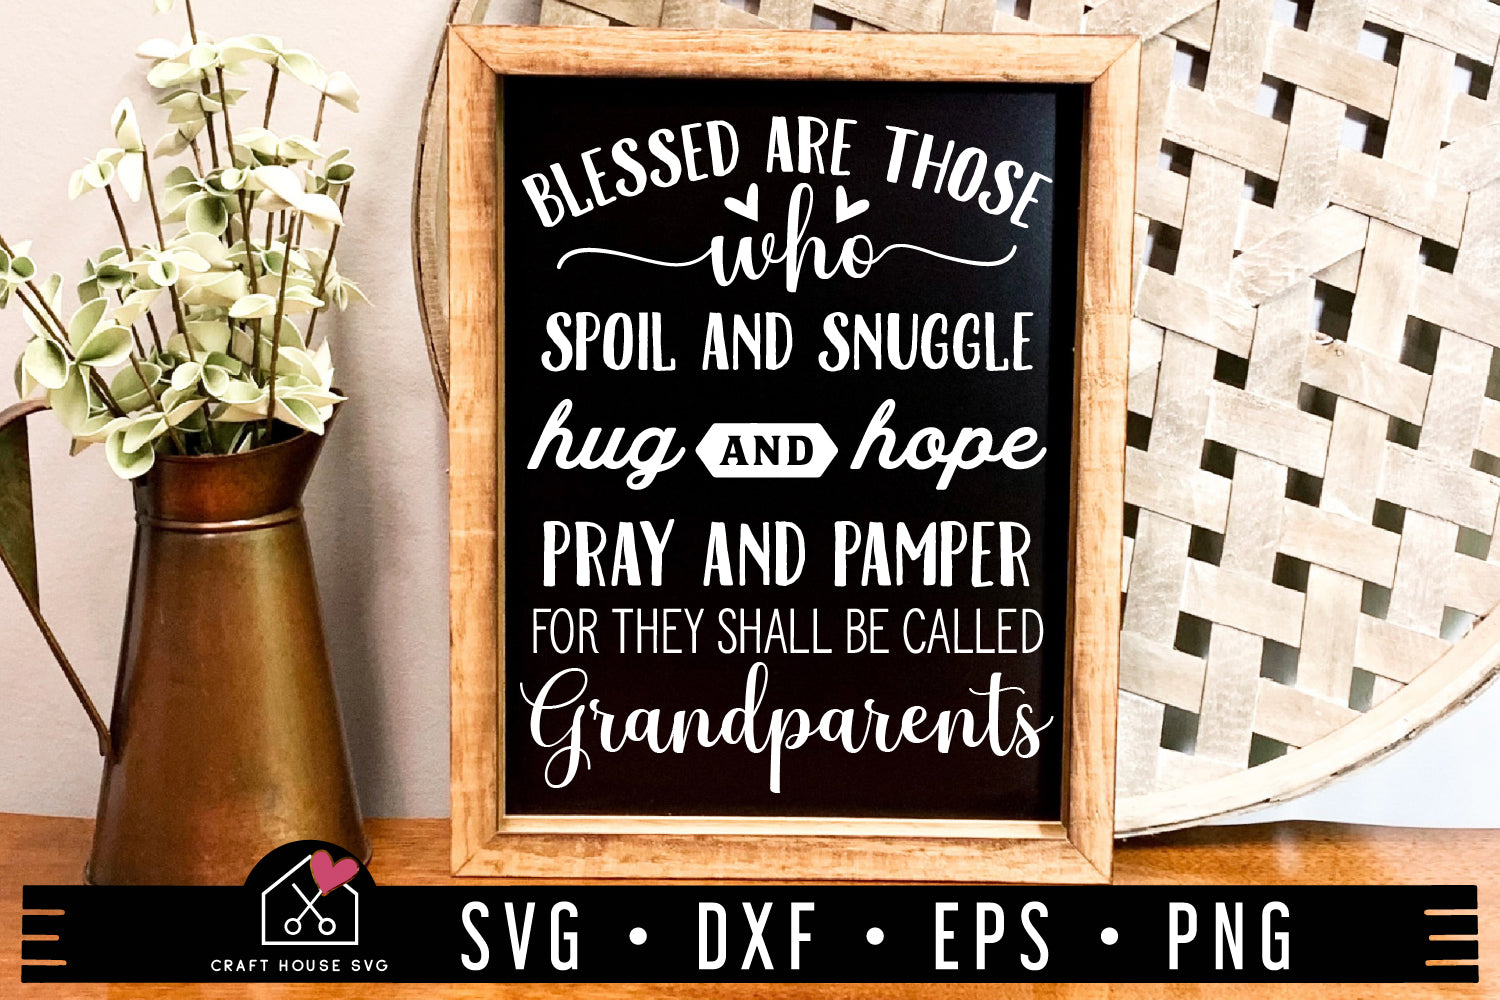 Blessed are those who spoil and snuggle SVG Grandparents Sign Cut File